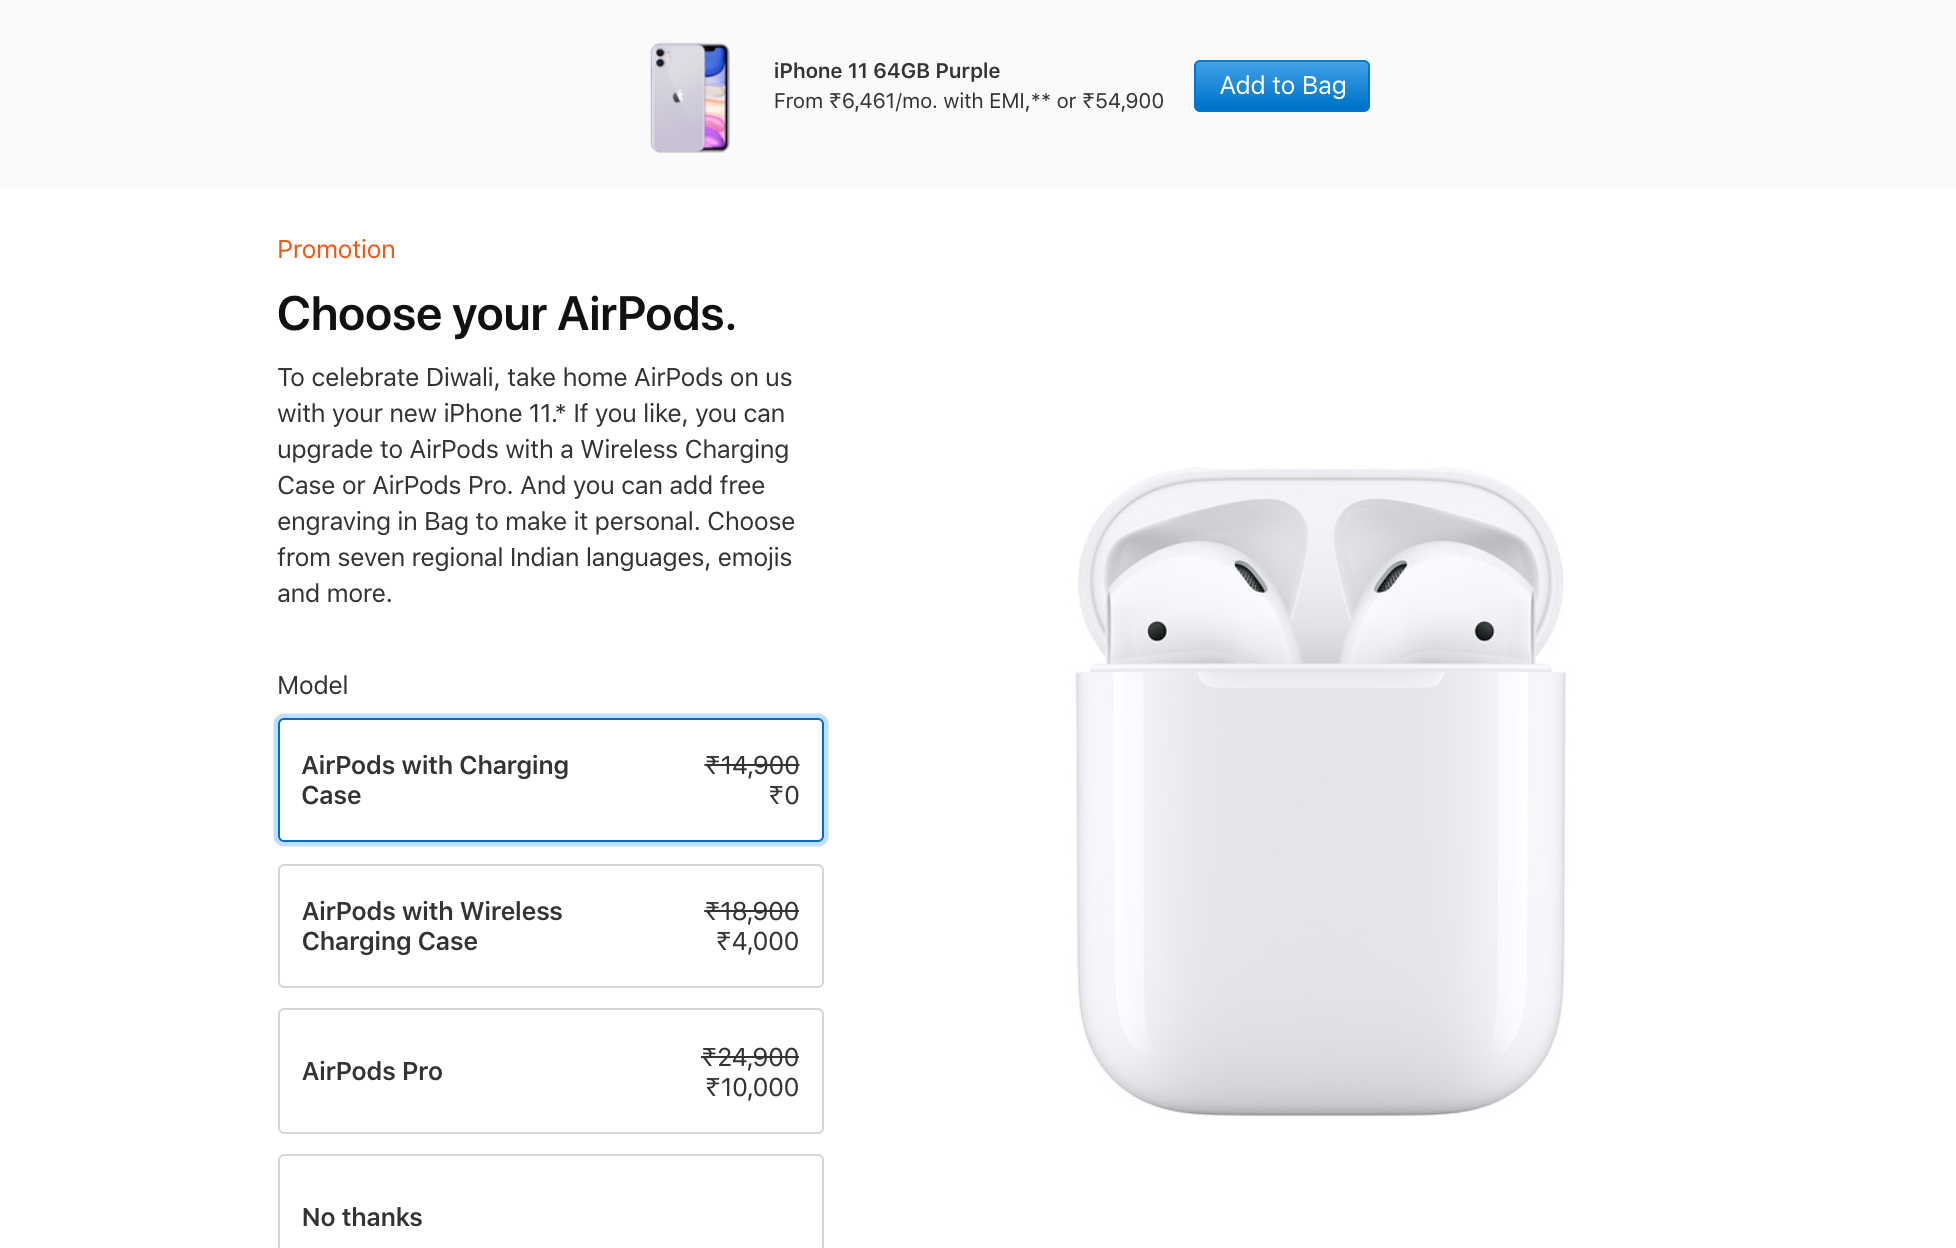 Apple Iphone 11 With Free Airpods Deal Goes Out Of Stock On Apple Online Store Times Of India